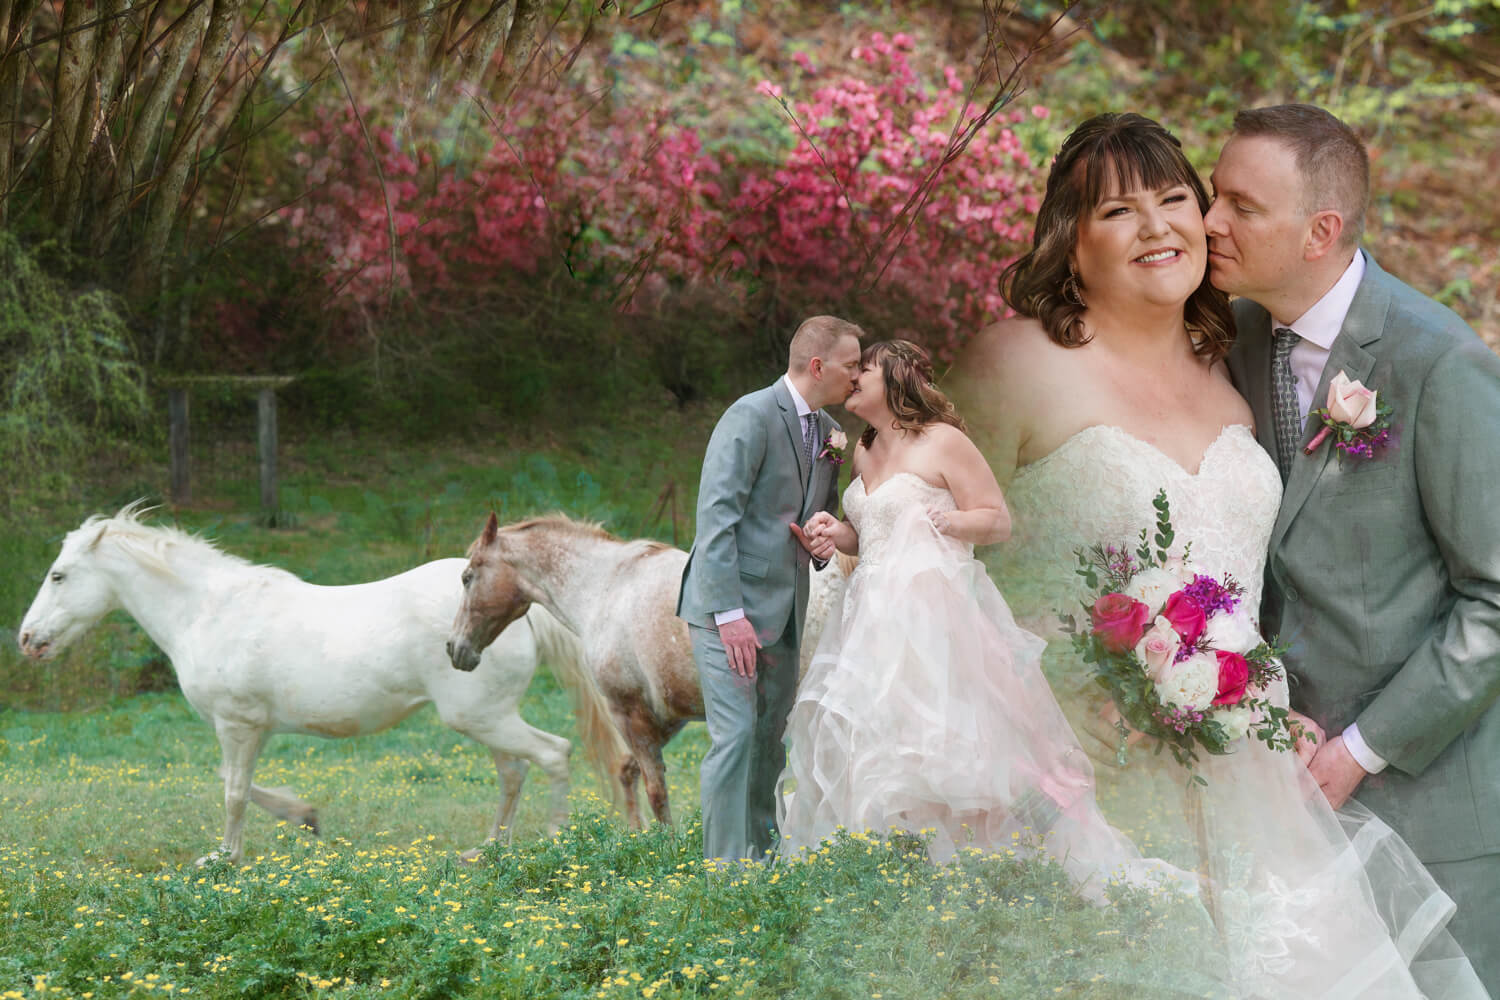 Artistic collage of a wedding couple with horses running in the spring